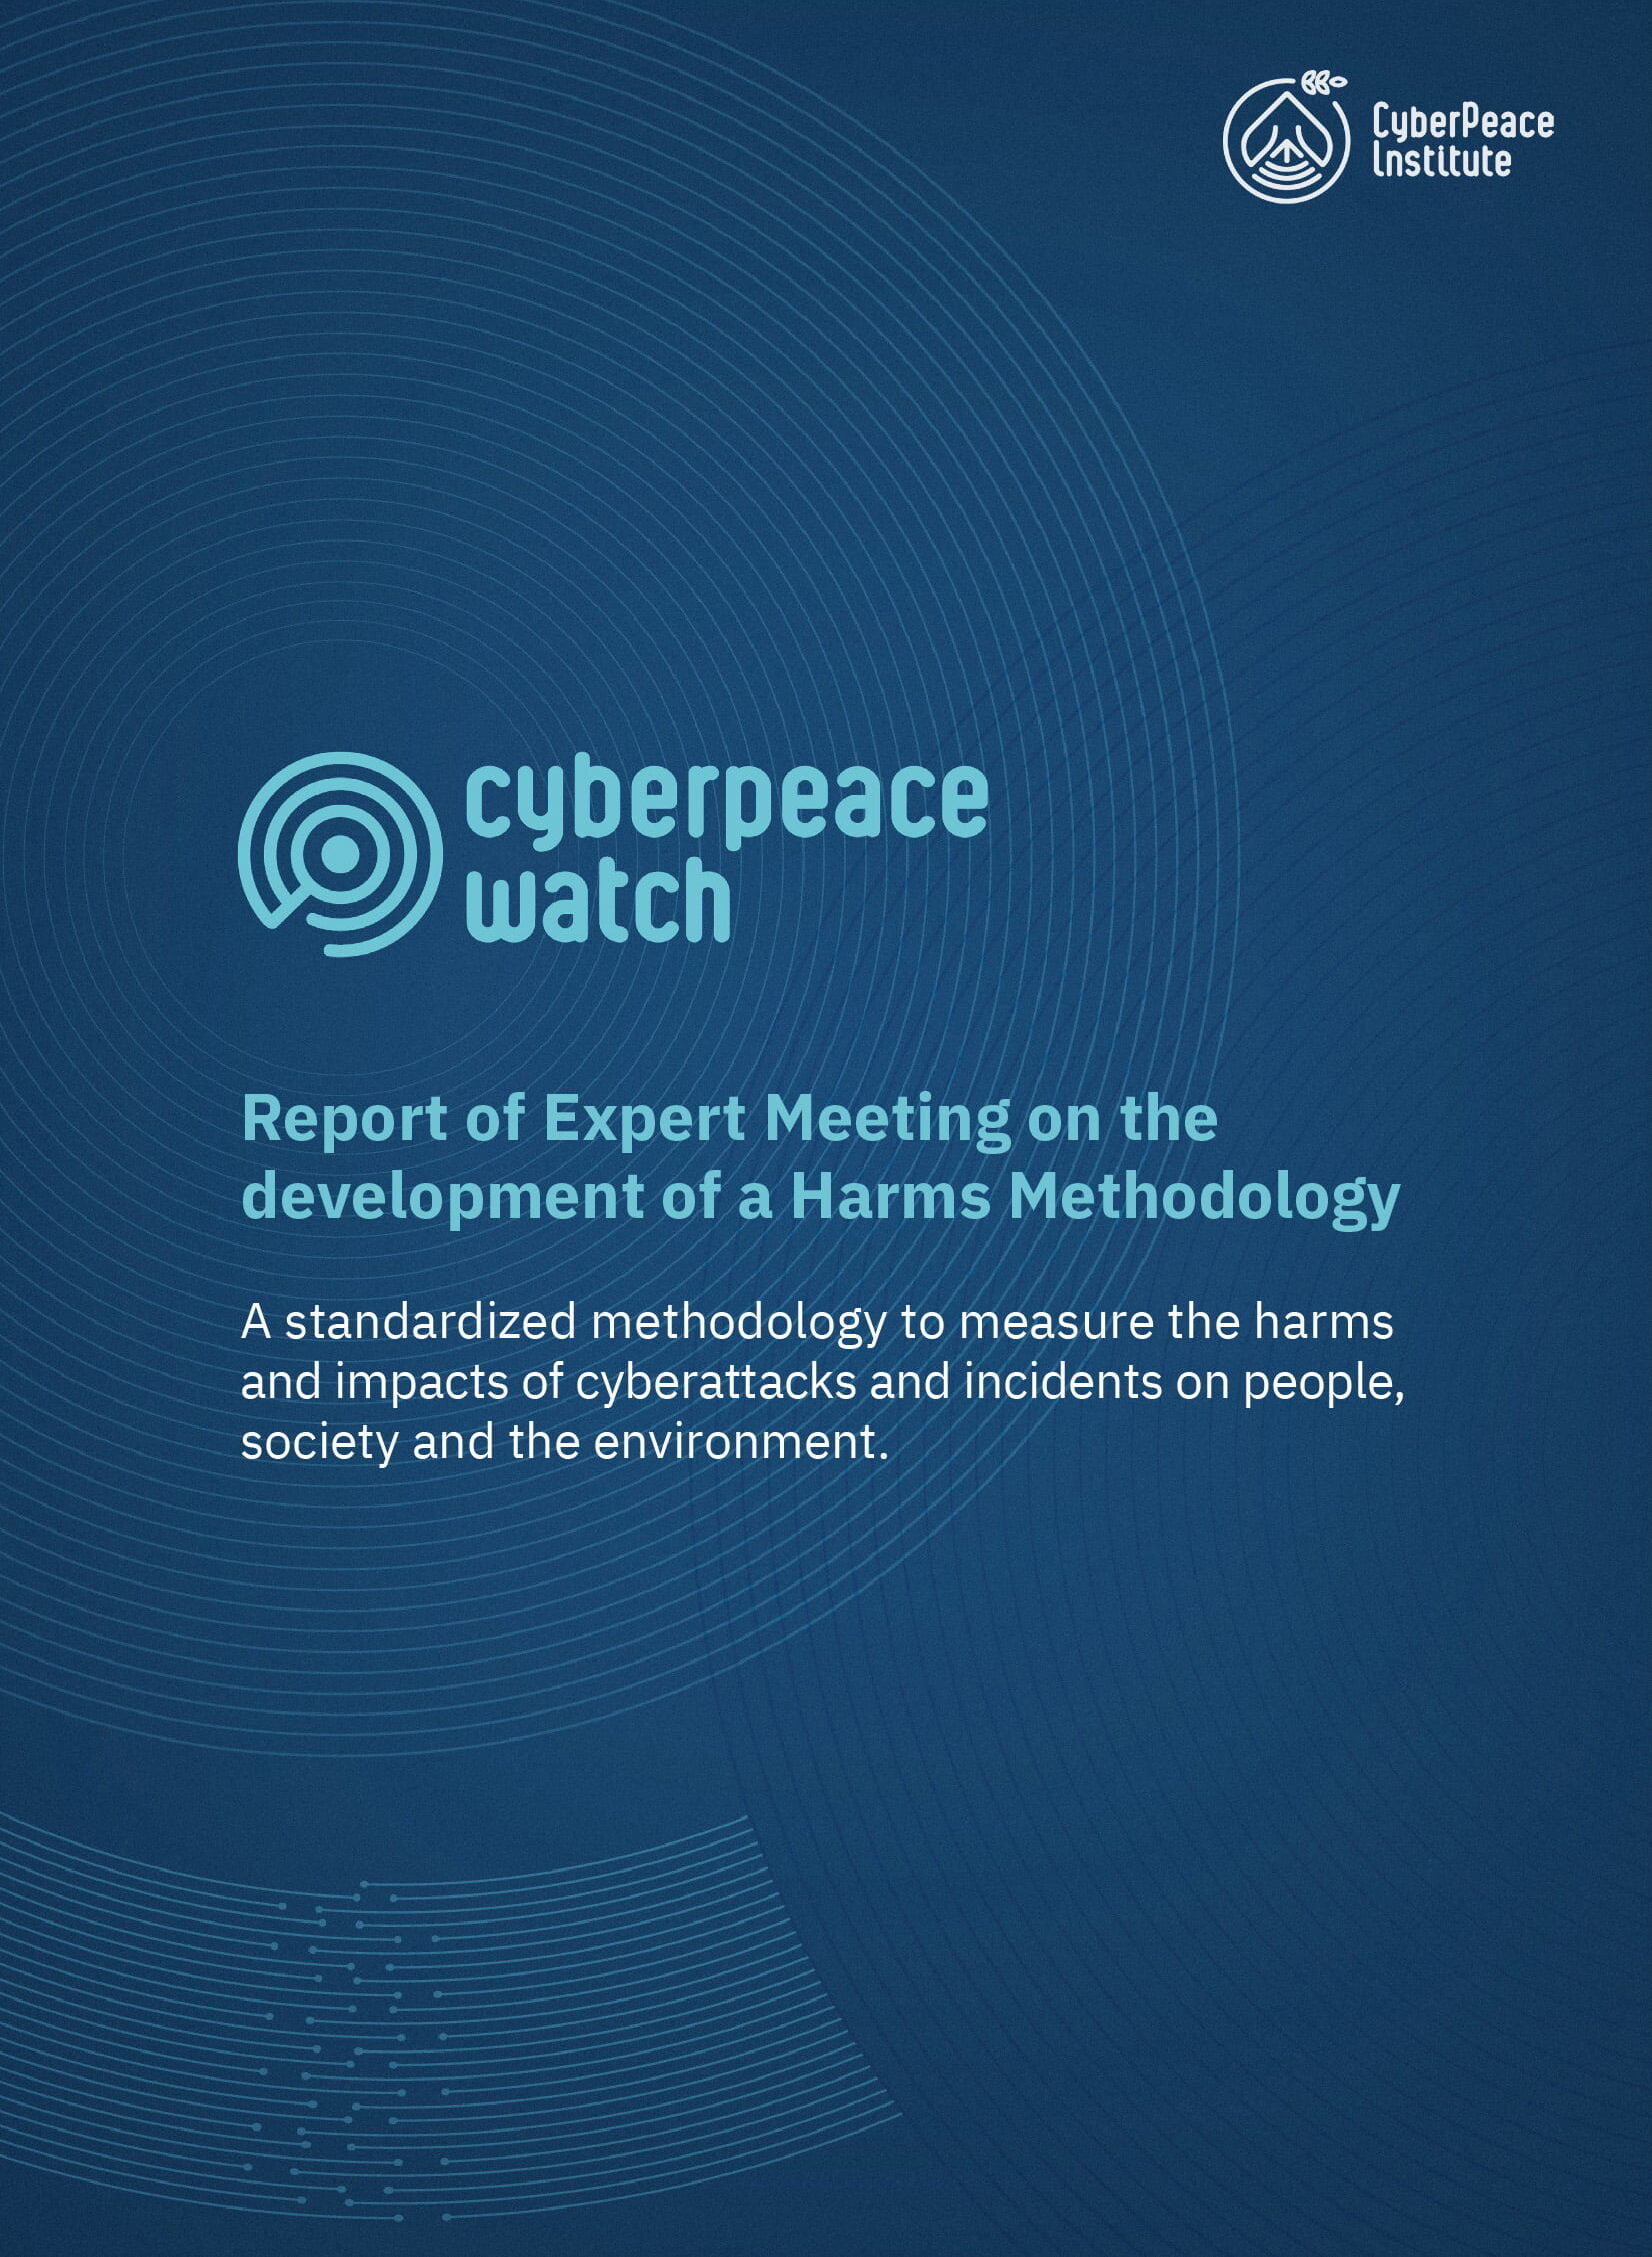 Report of Expert Meeting on the development of a Harms Methodology